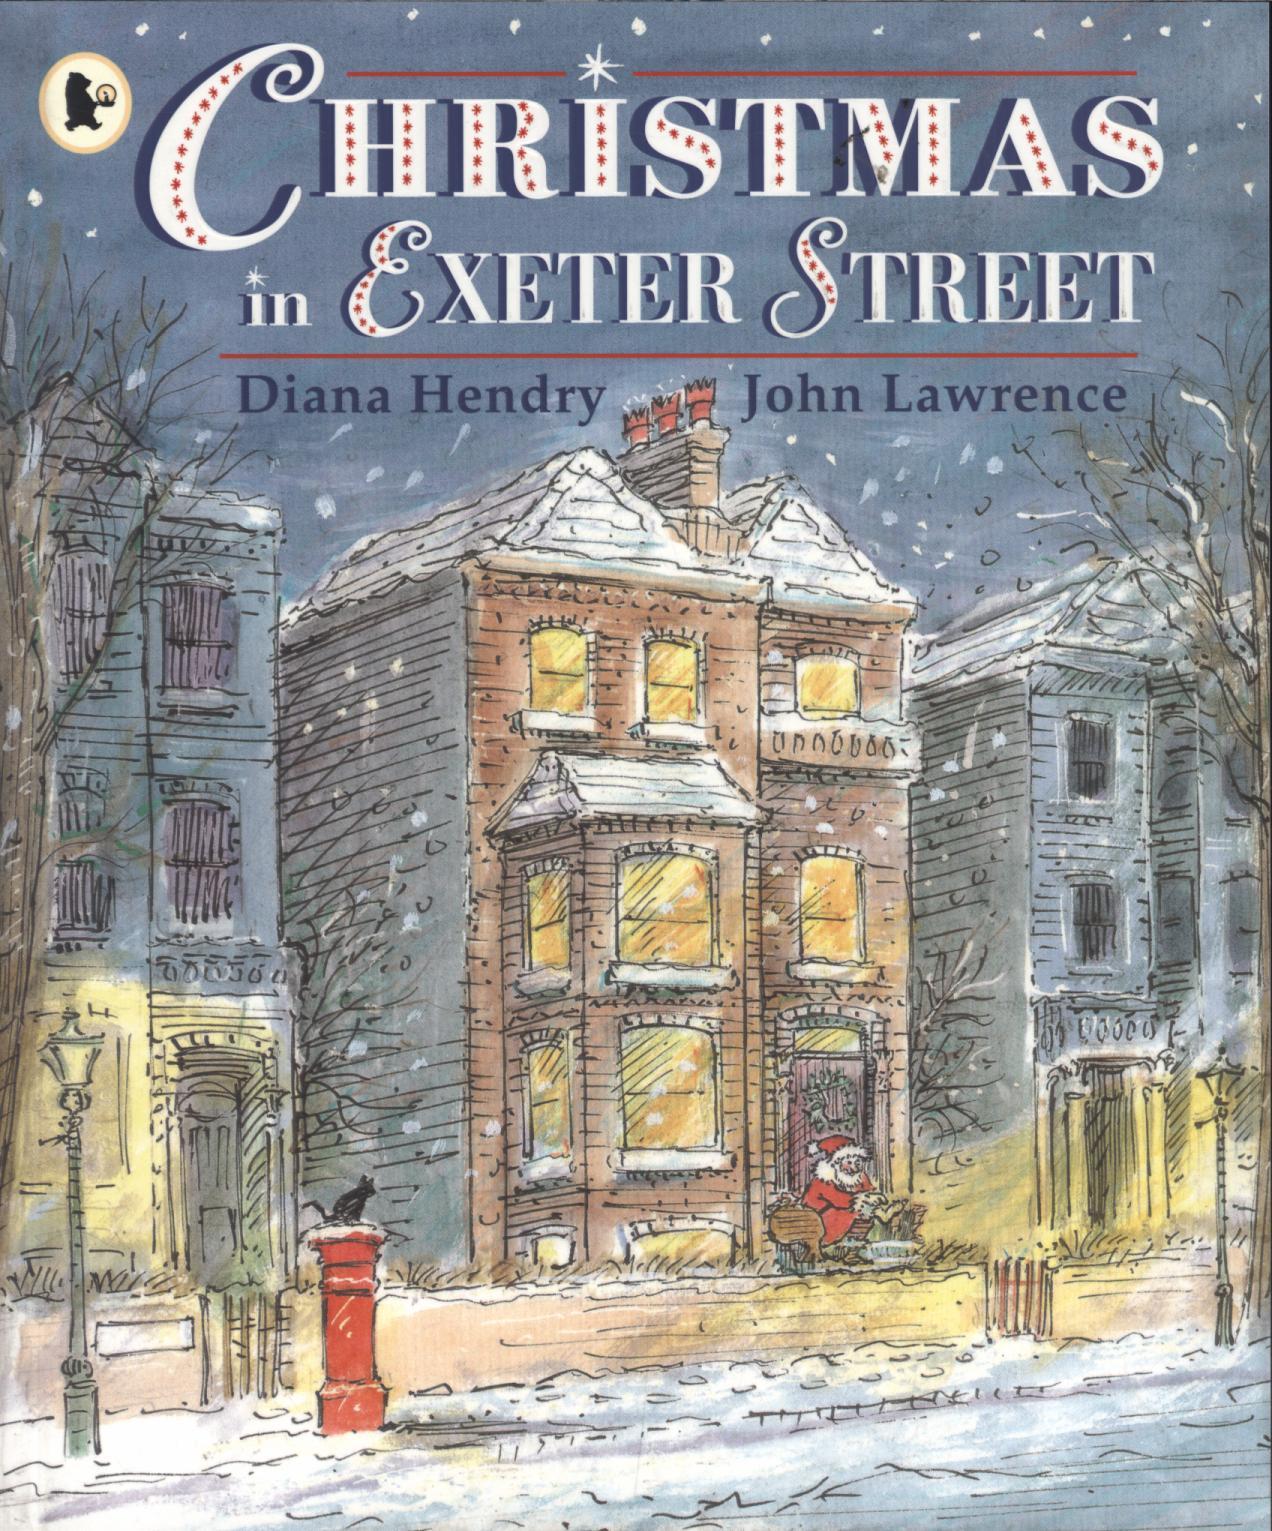 Christmas in Exeter Street - Diana Hendry